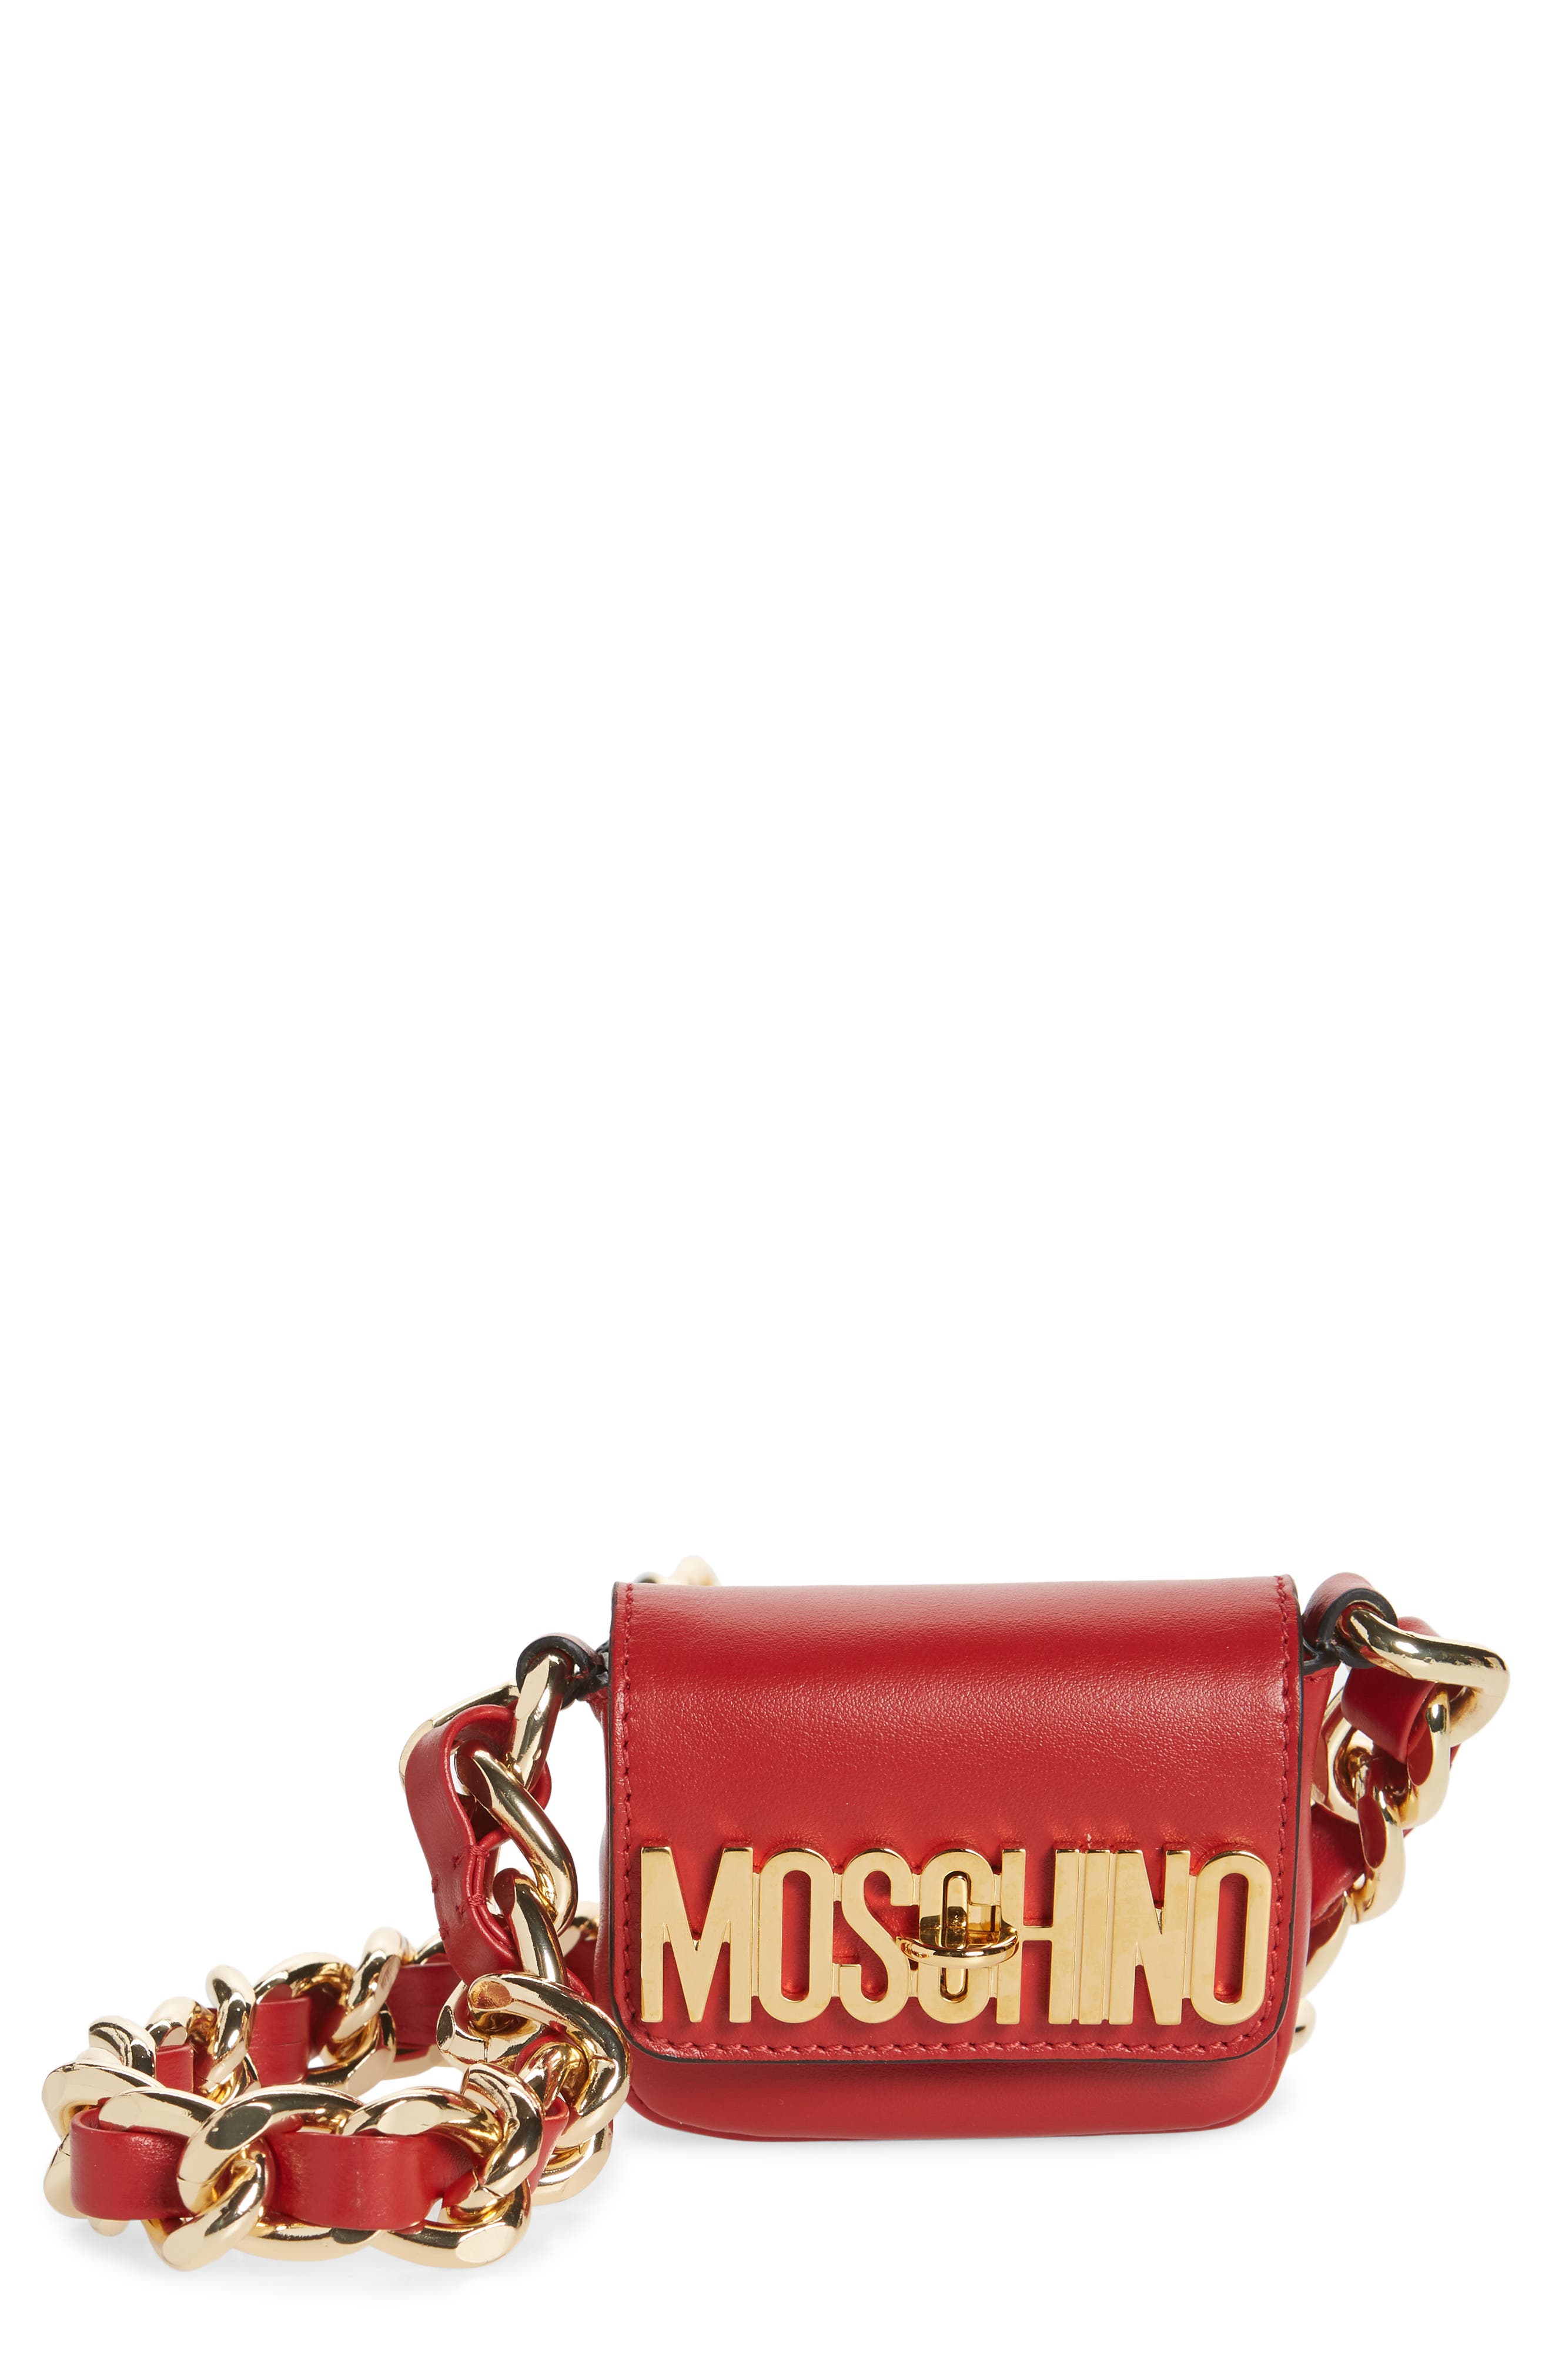 moschino shoes nordstrom